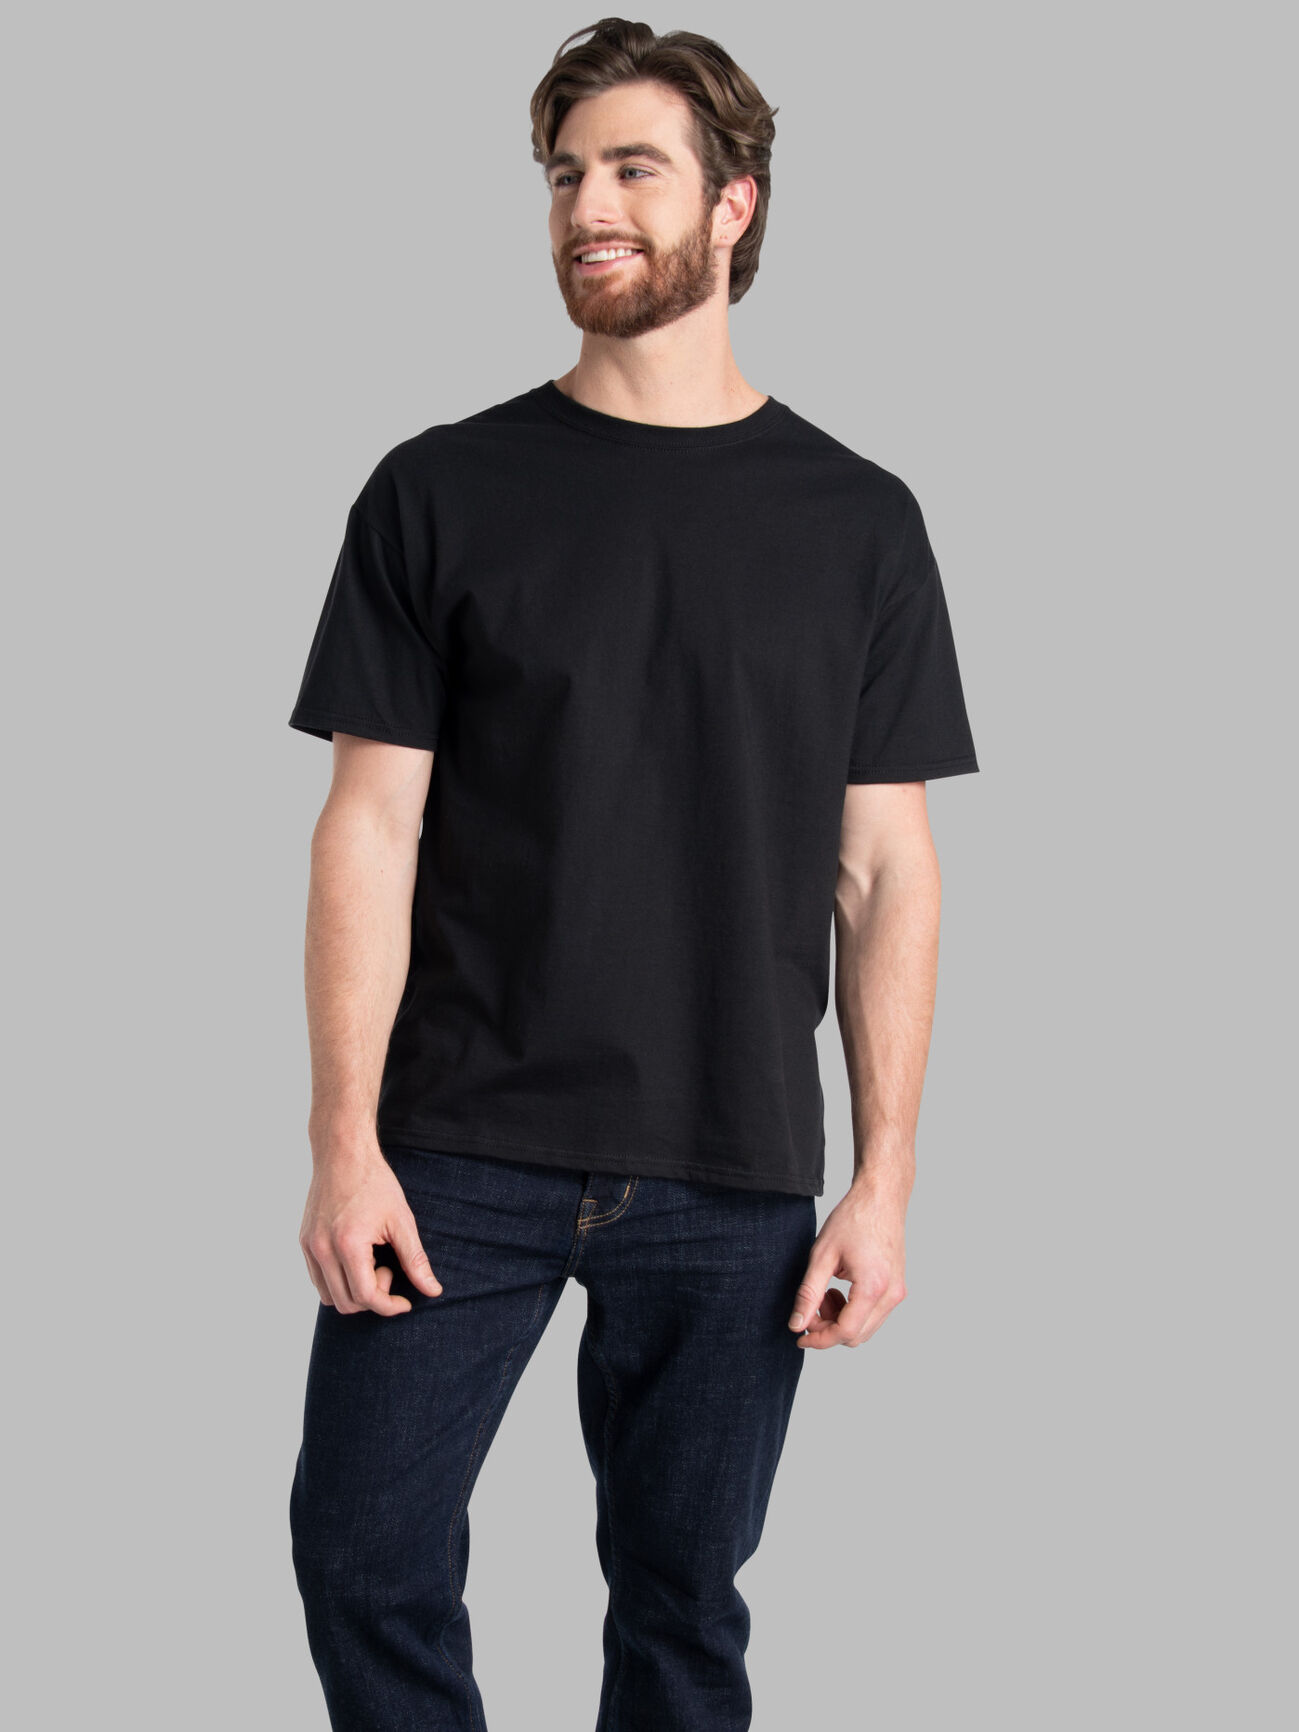 Fruit of the Loom SC61044 - T-Shirt Homme Manches Courtes 100